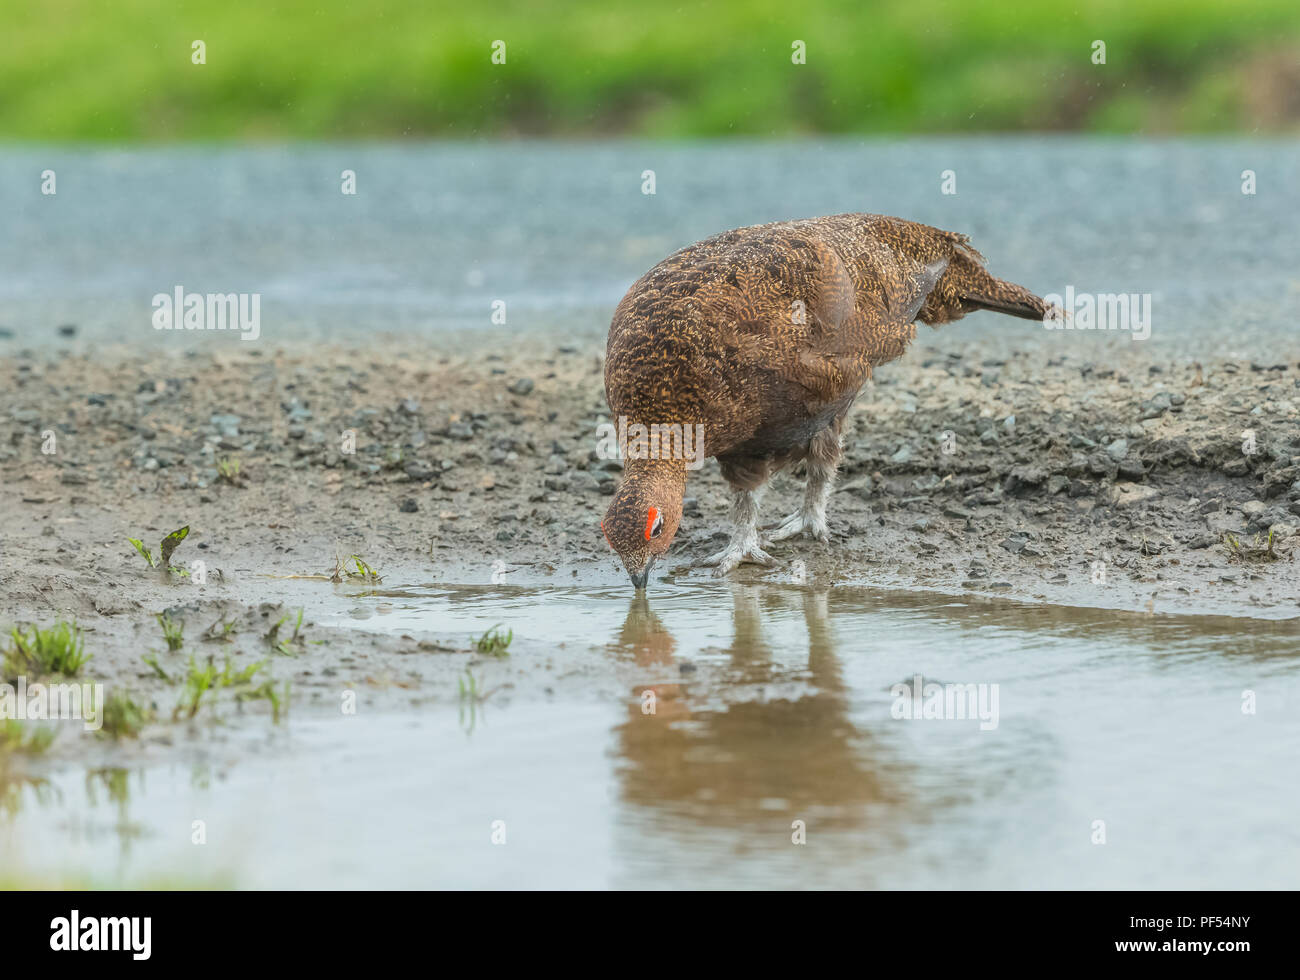 Red Grouse, male, cockbird drinking water from puddle on UK Grouse Moor during the 2018 heatwave.  Scientific name: lagopus lagopus scotica.Horizontal Stock Photo